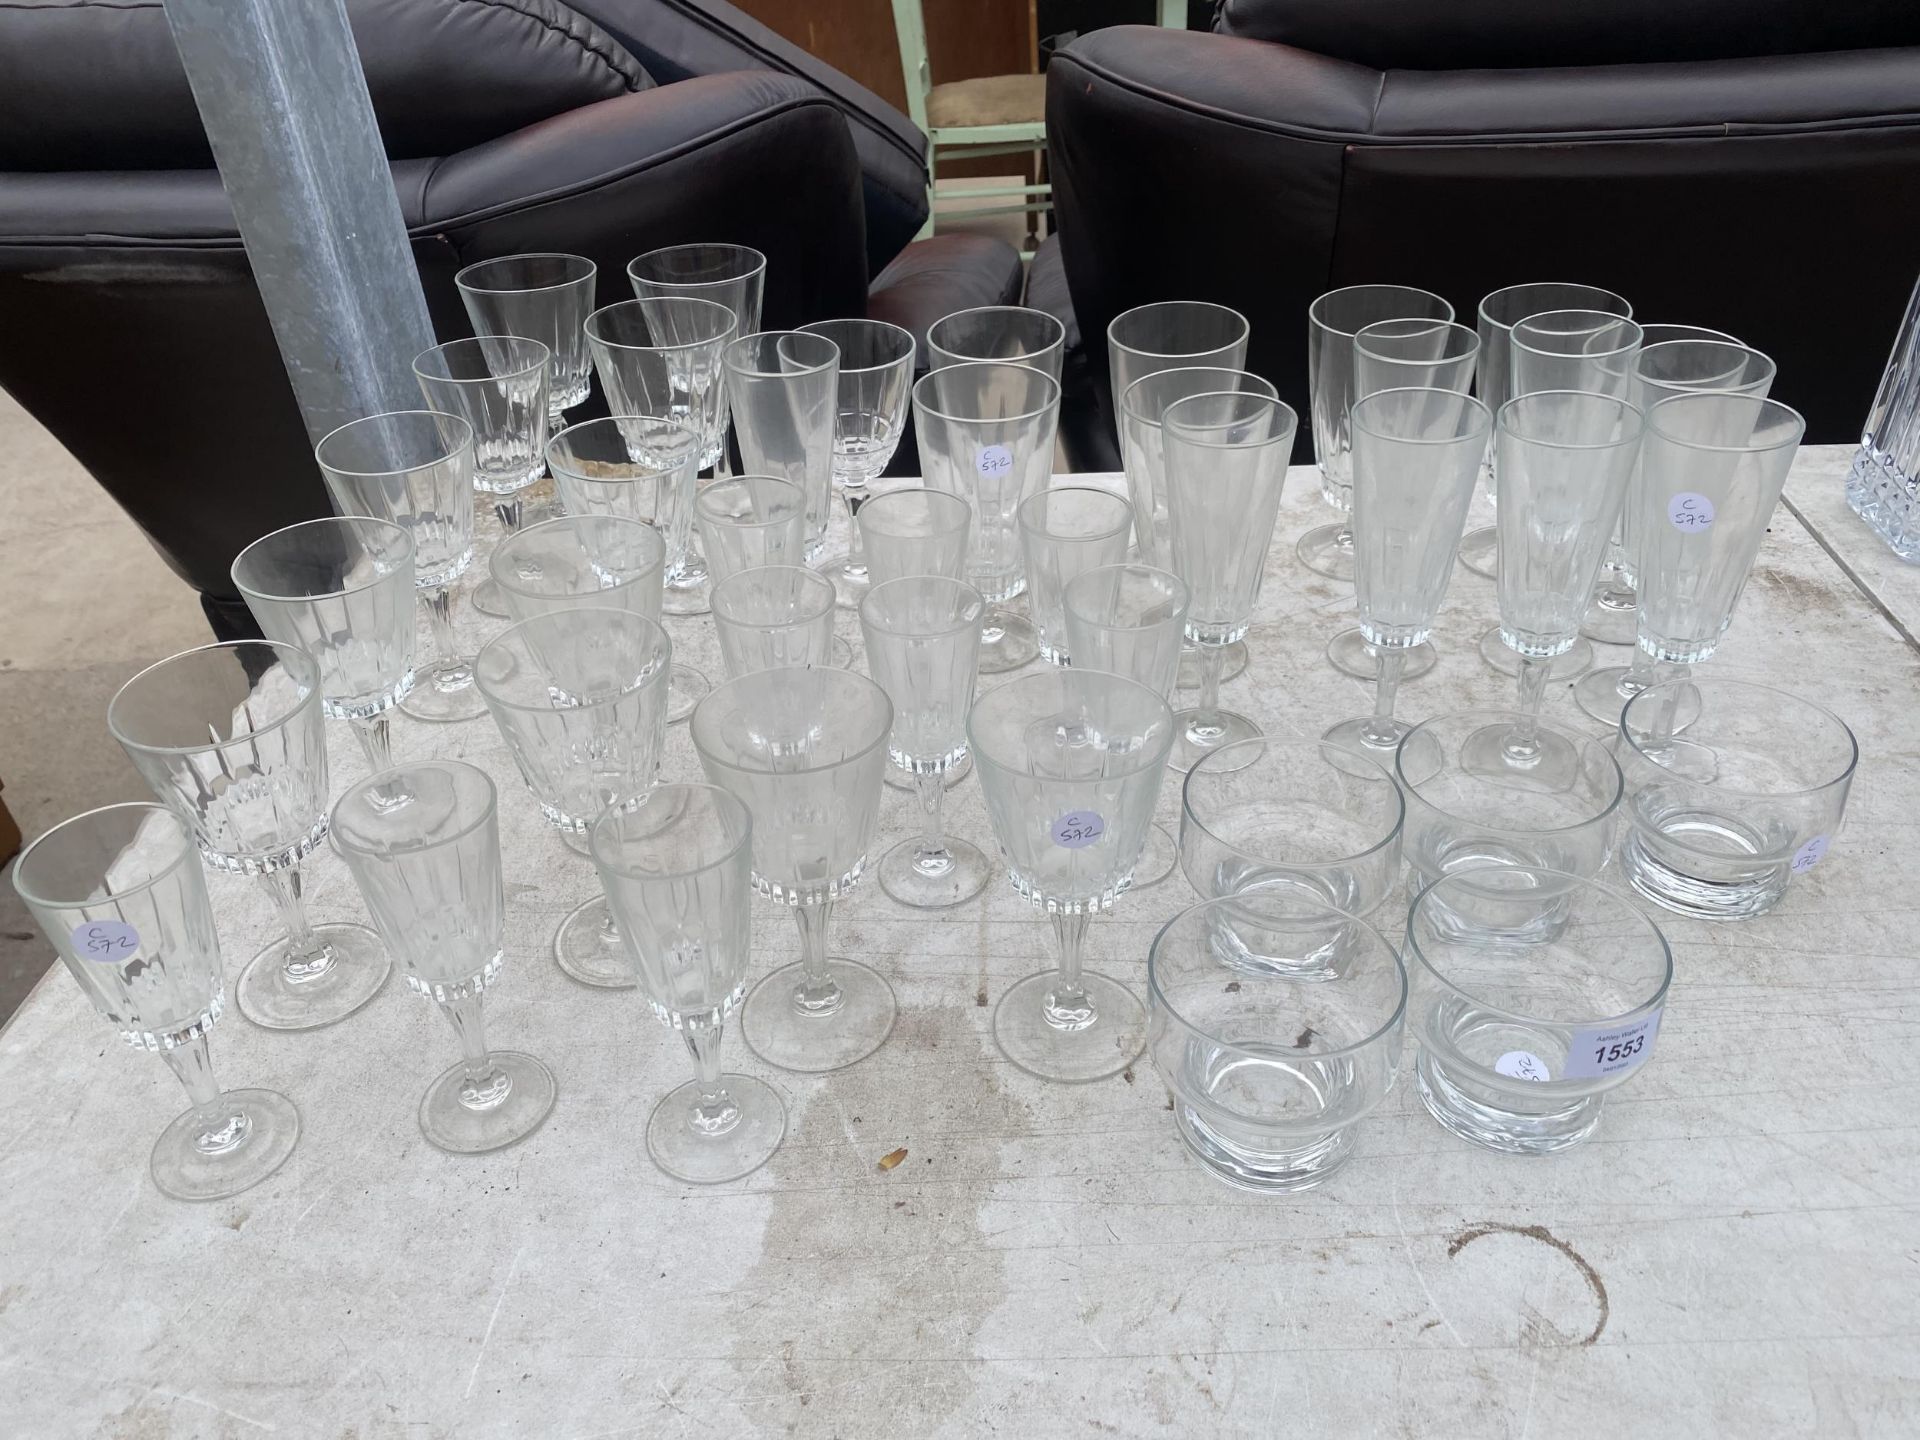 A LARGE ASSORTMENT OF GLASS WARE TO INCLUDE WINE GLASSES AND CHAMPAGNE FLUTES ETC